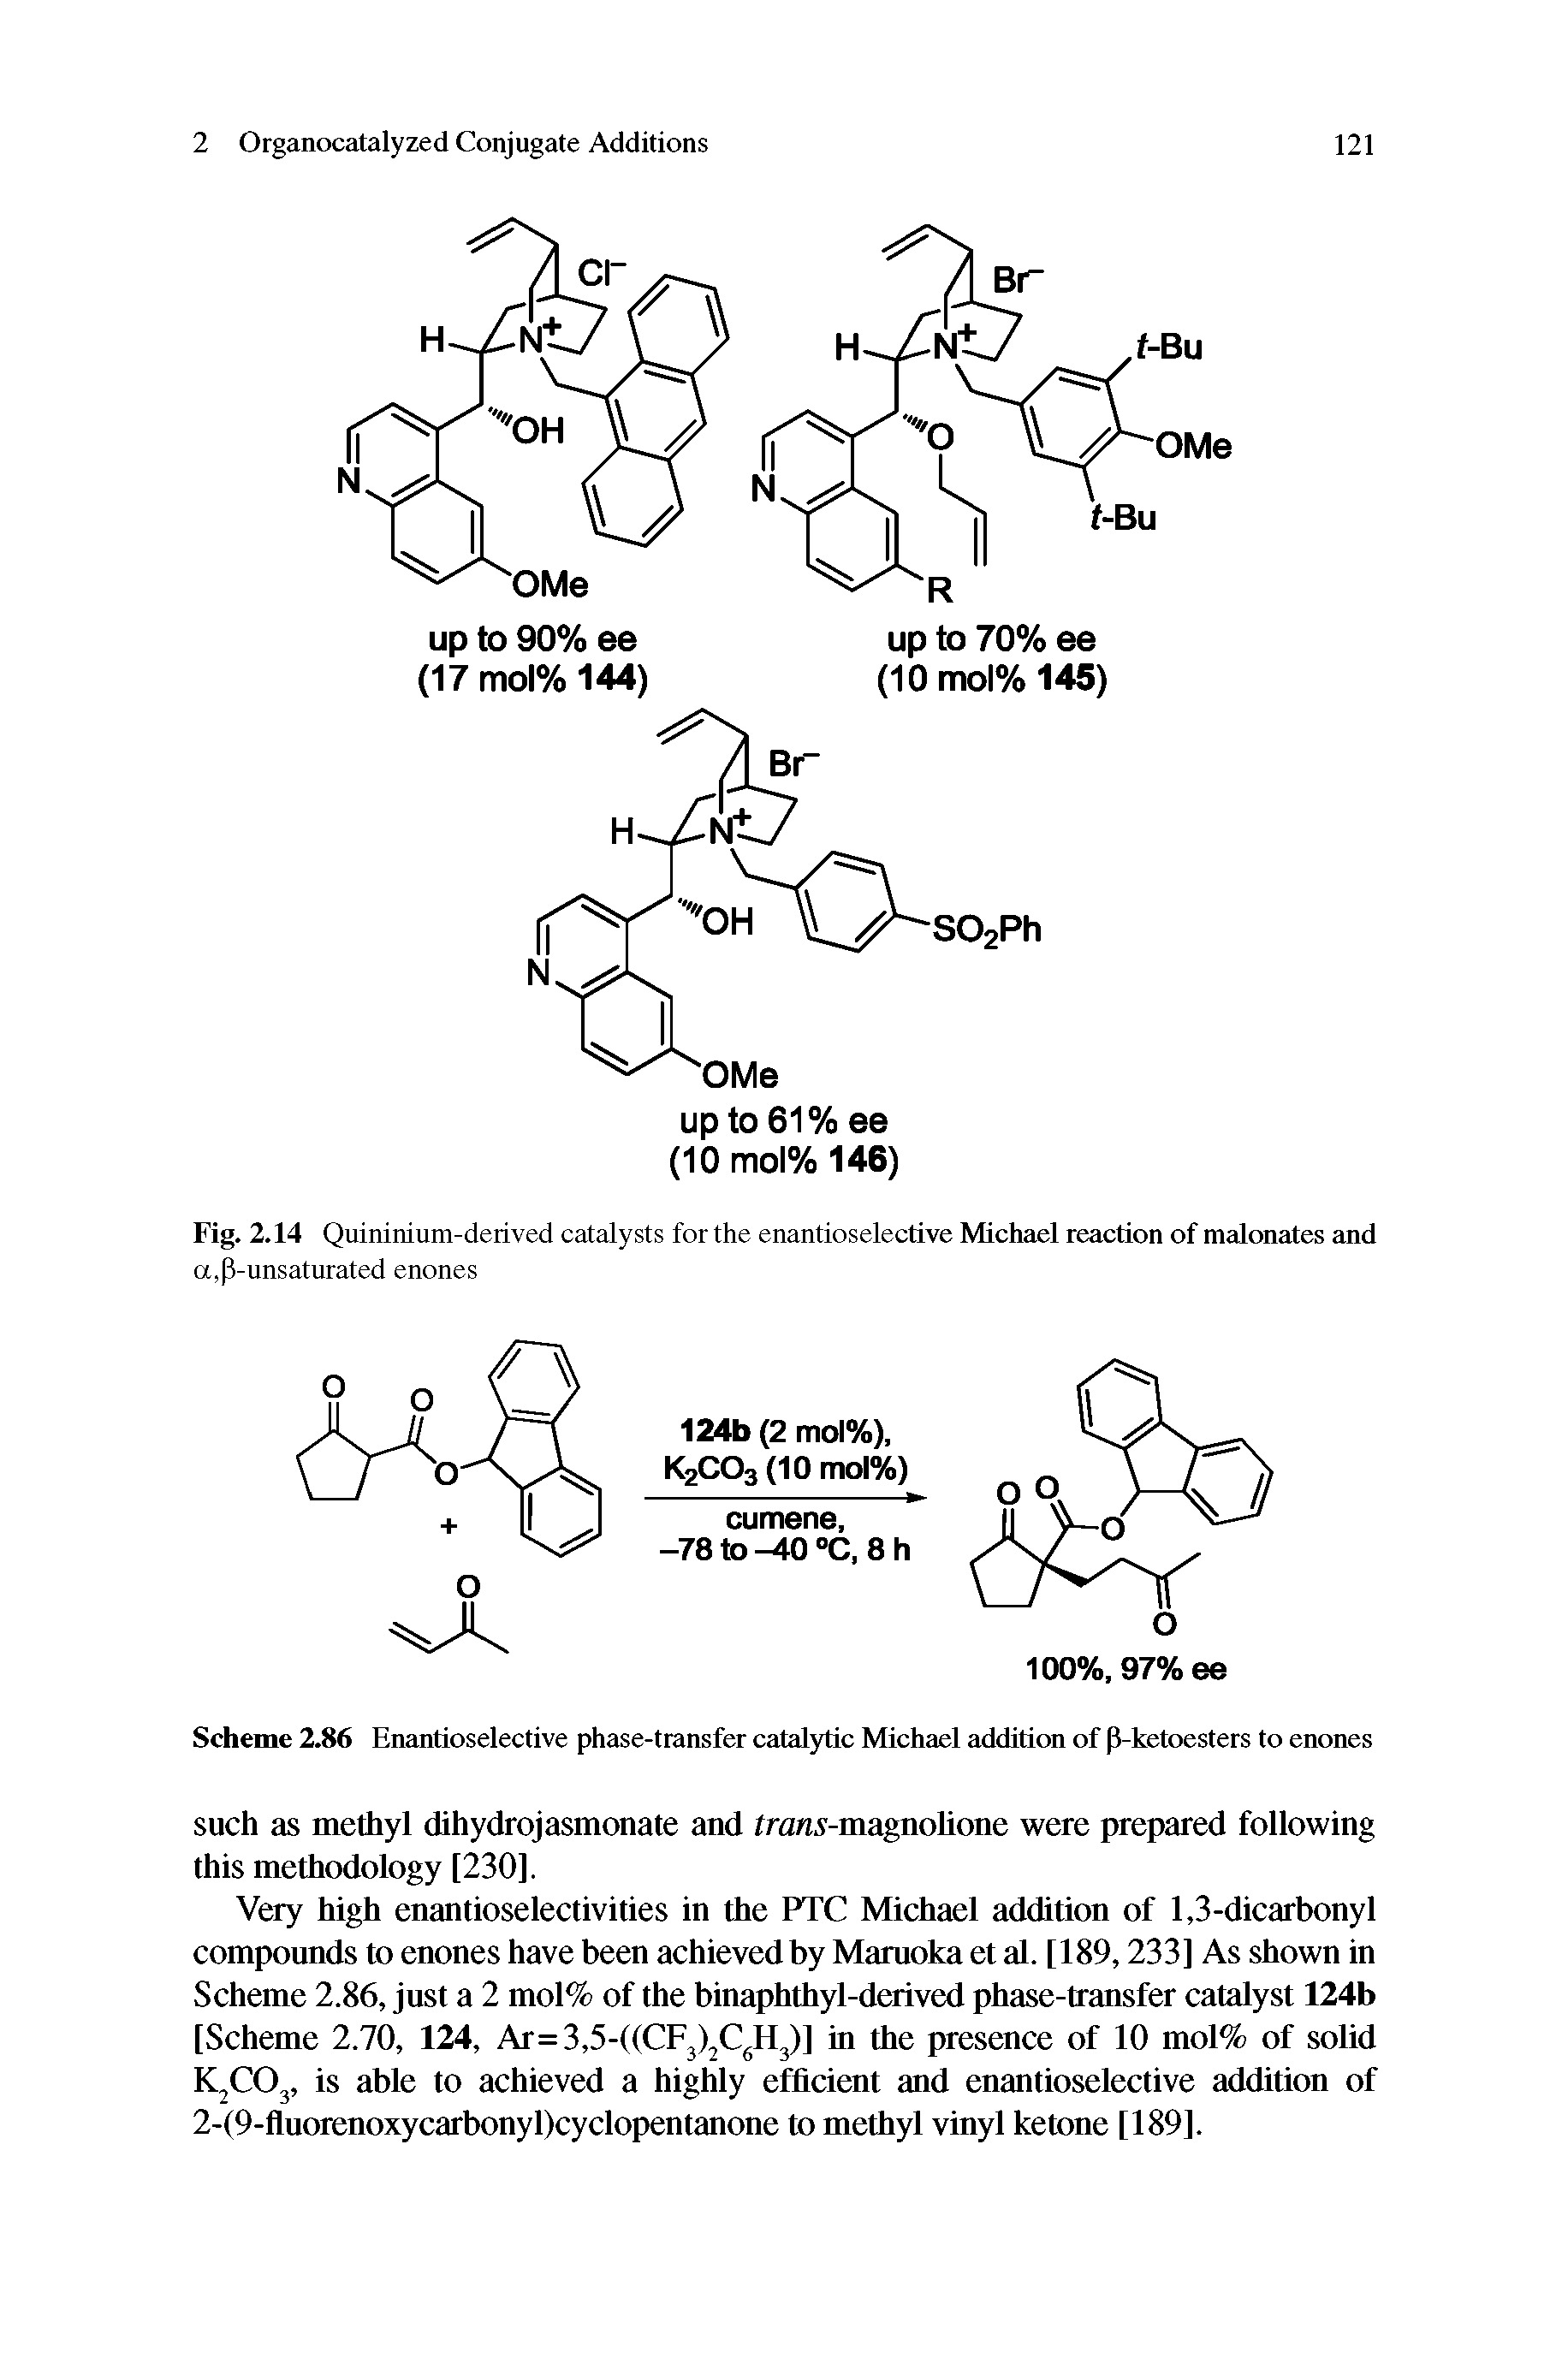 Scheme 2.86 Enantioselective phase-transfer catalytic Michael addition of p-ketoesters to enones...